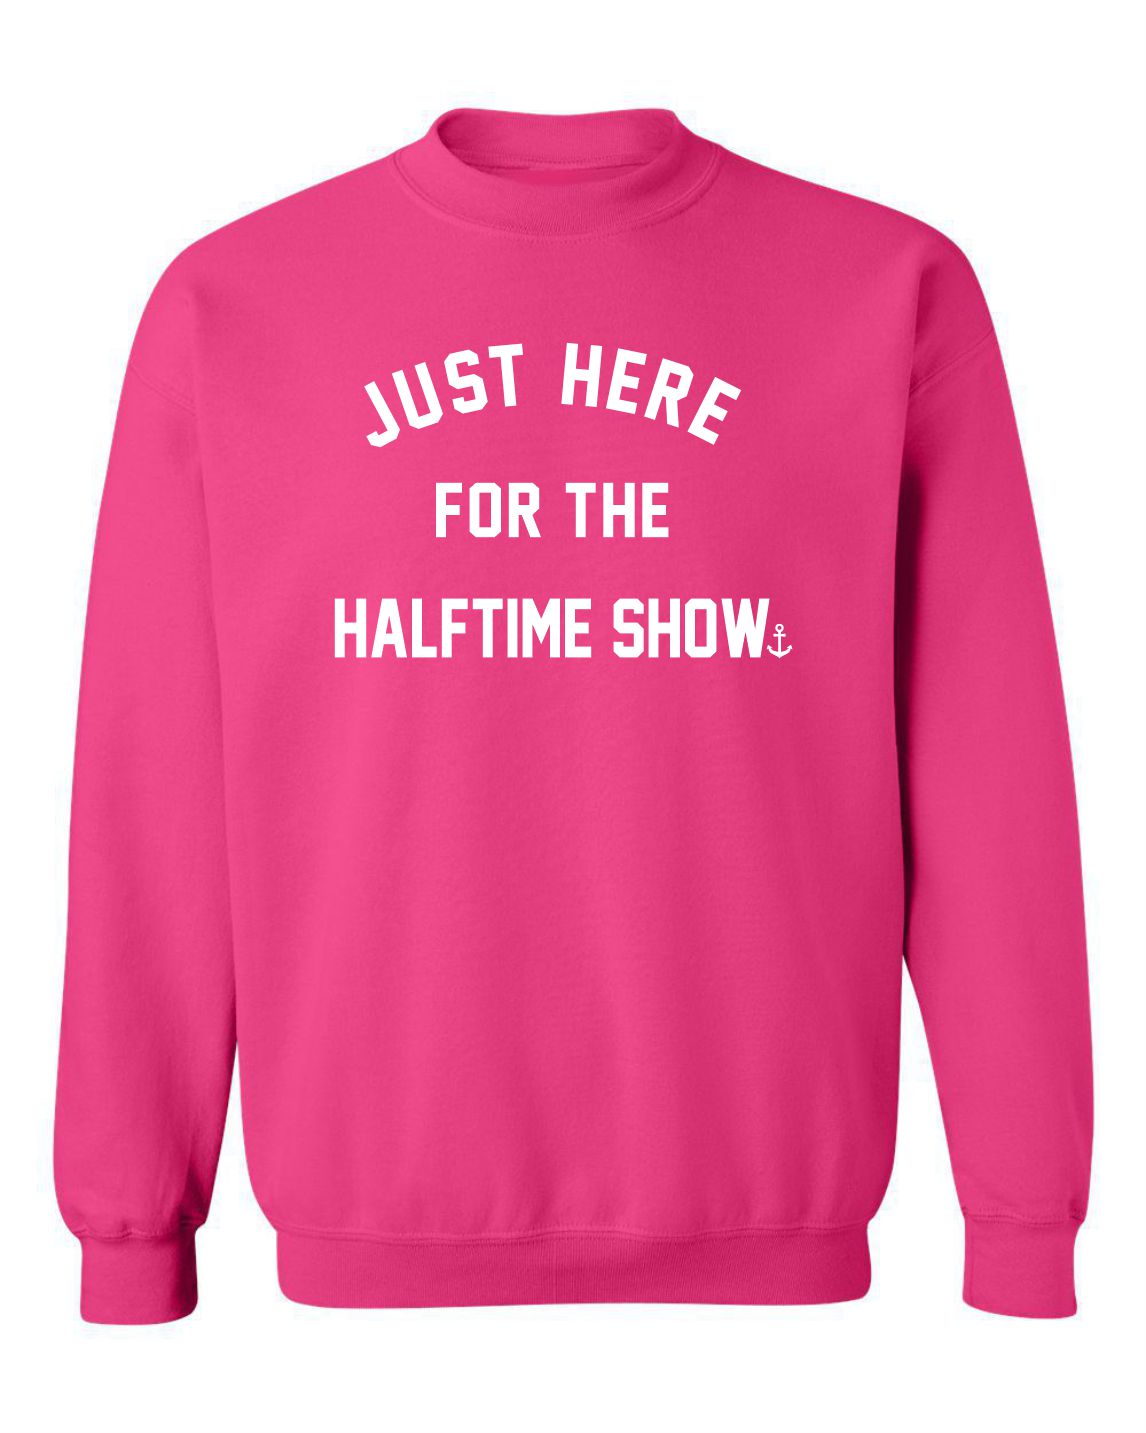 "Just Here For The Halftime Show" Unisex Crewneck Sweatshirt